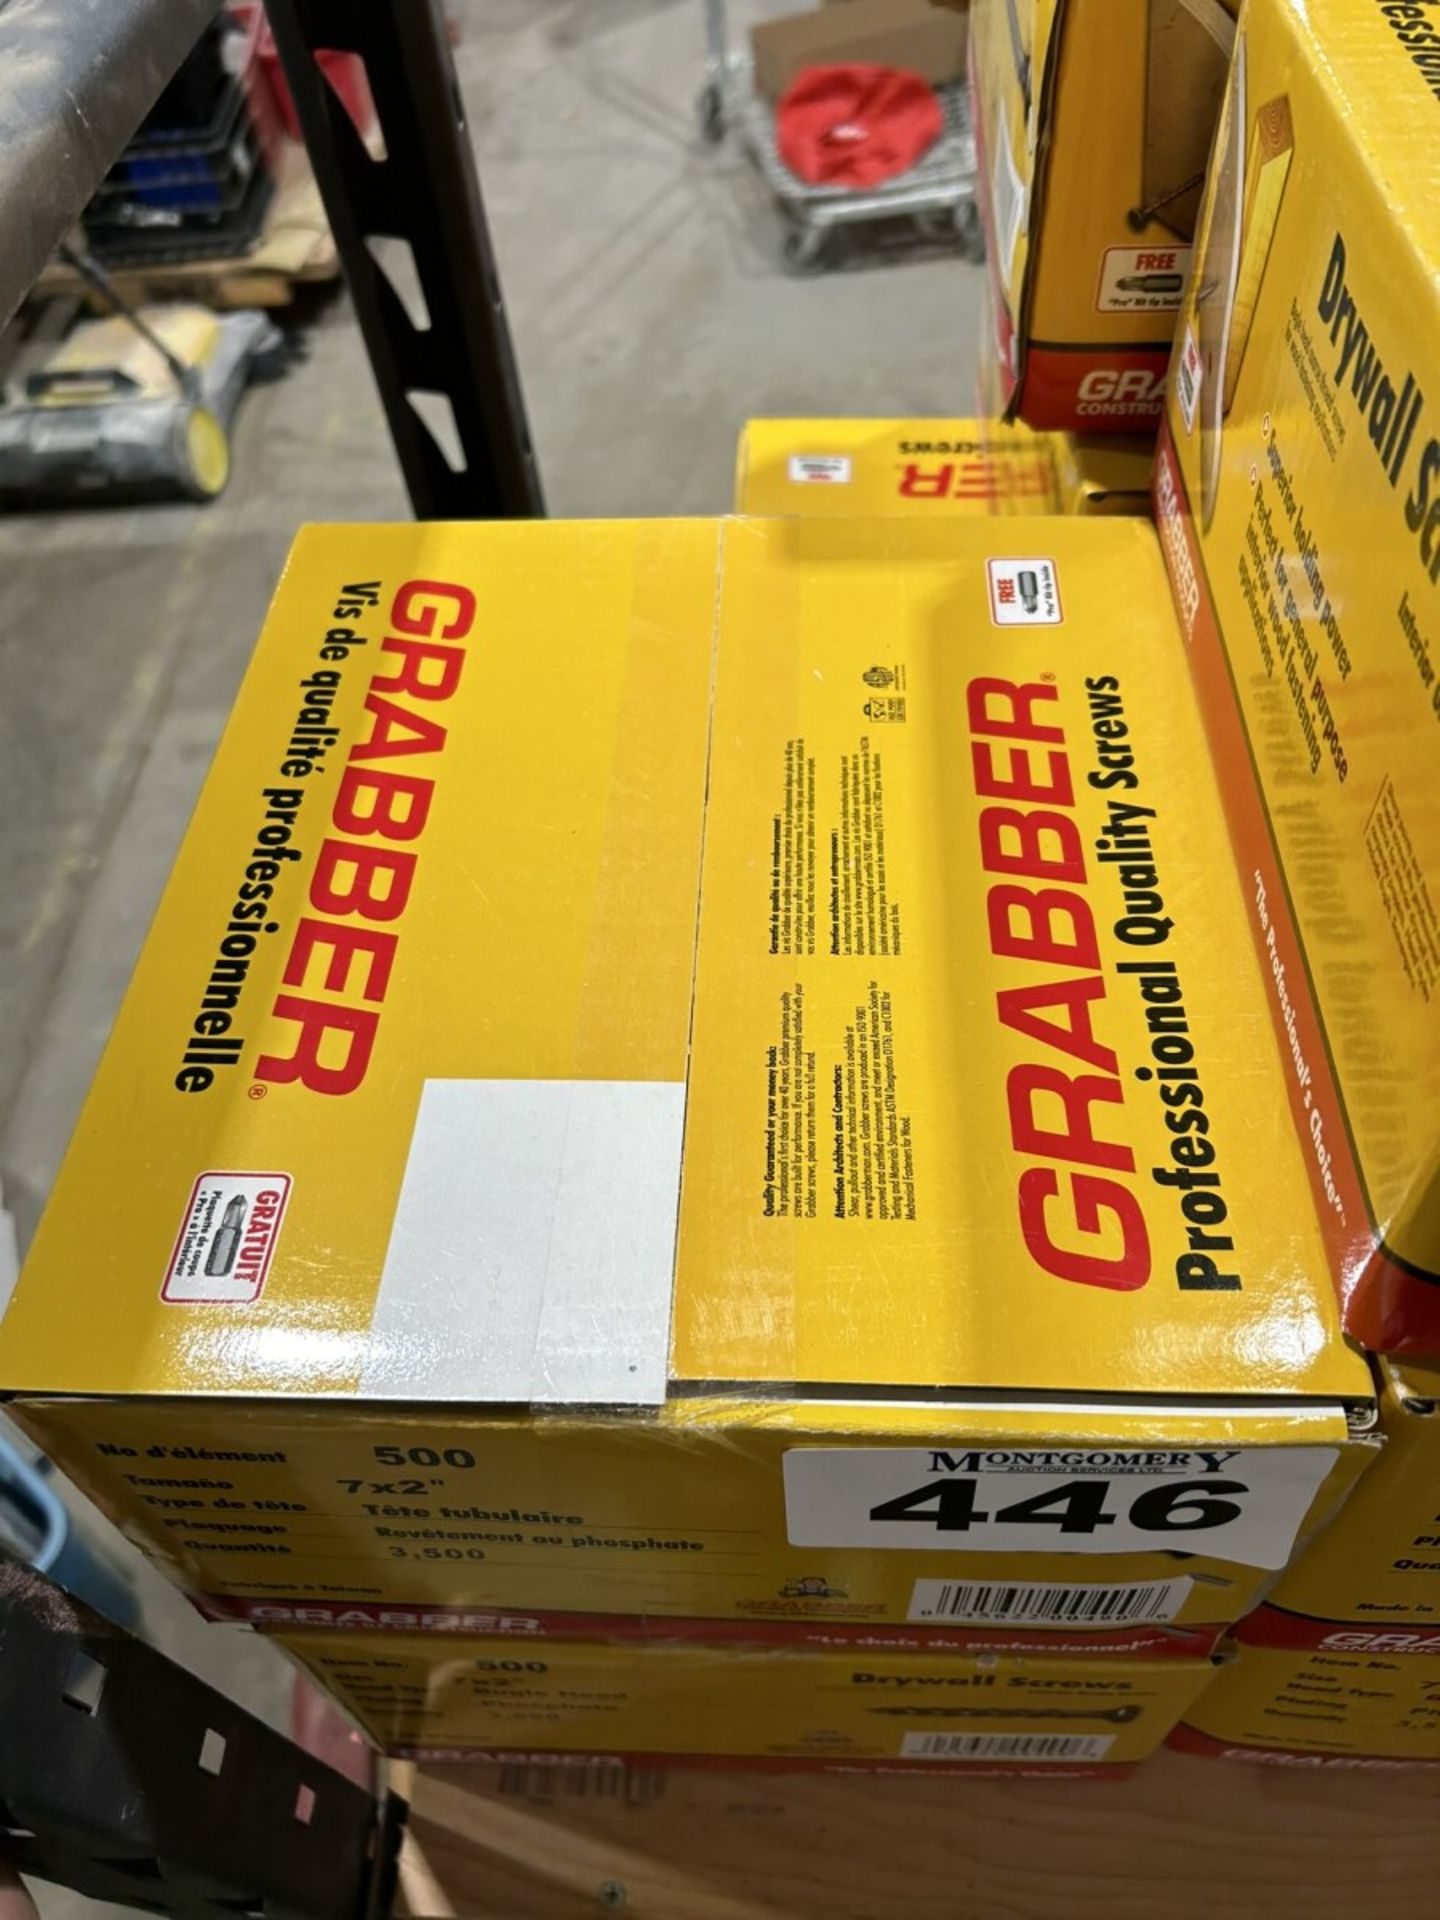 2-BOXES OF GRABBER 7X2" DRYWALL SCREWS (TIMES THE MONEY X2) - Image 2 of 3